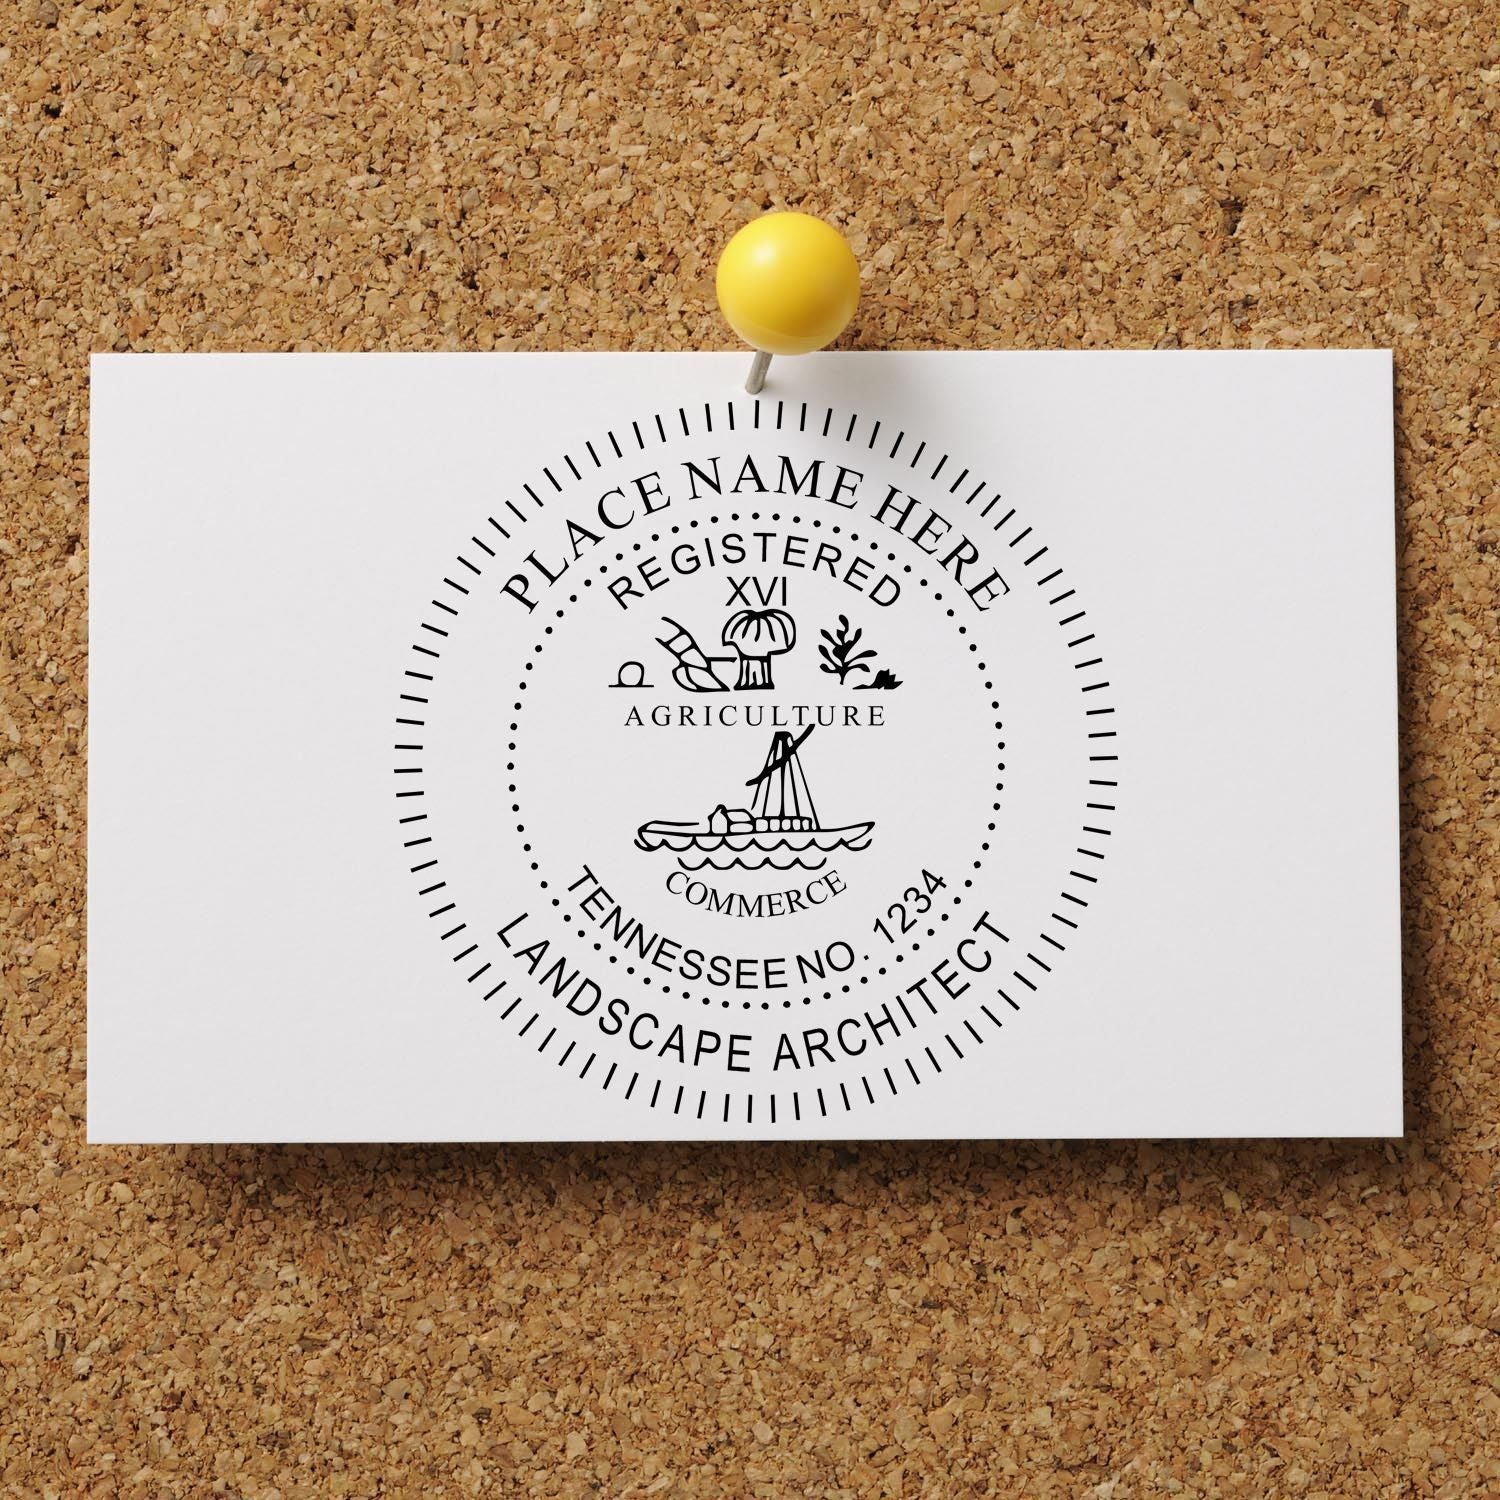 This paper is stamped with a sample imprint of the Slim Pre-Inked Tennessee Landscape Architect Seal Stamp, signifying its quality and reliability.